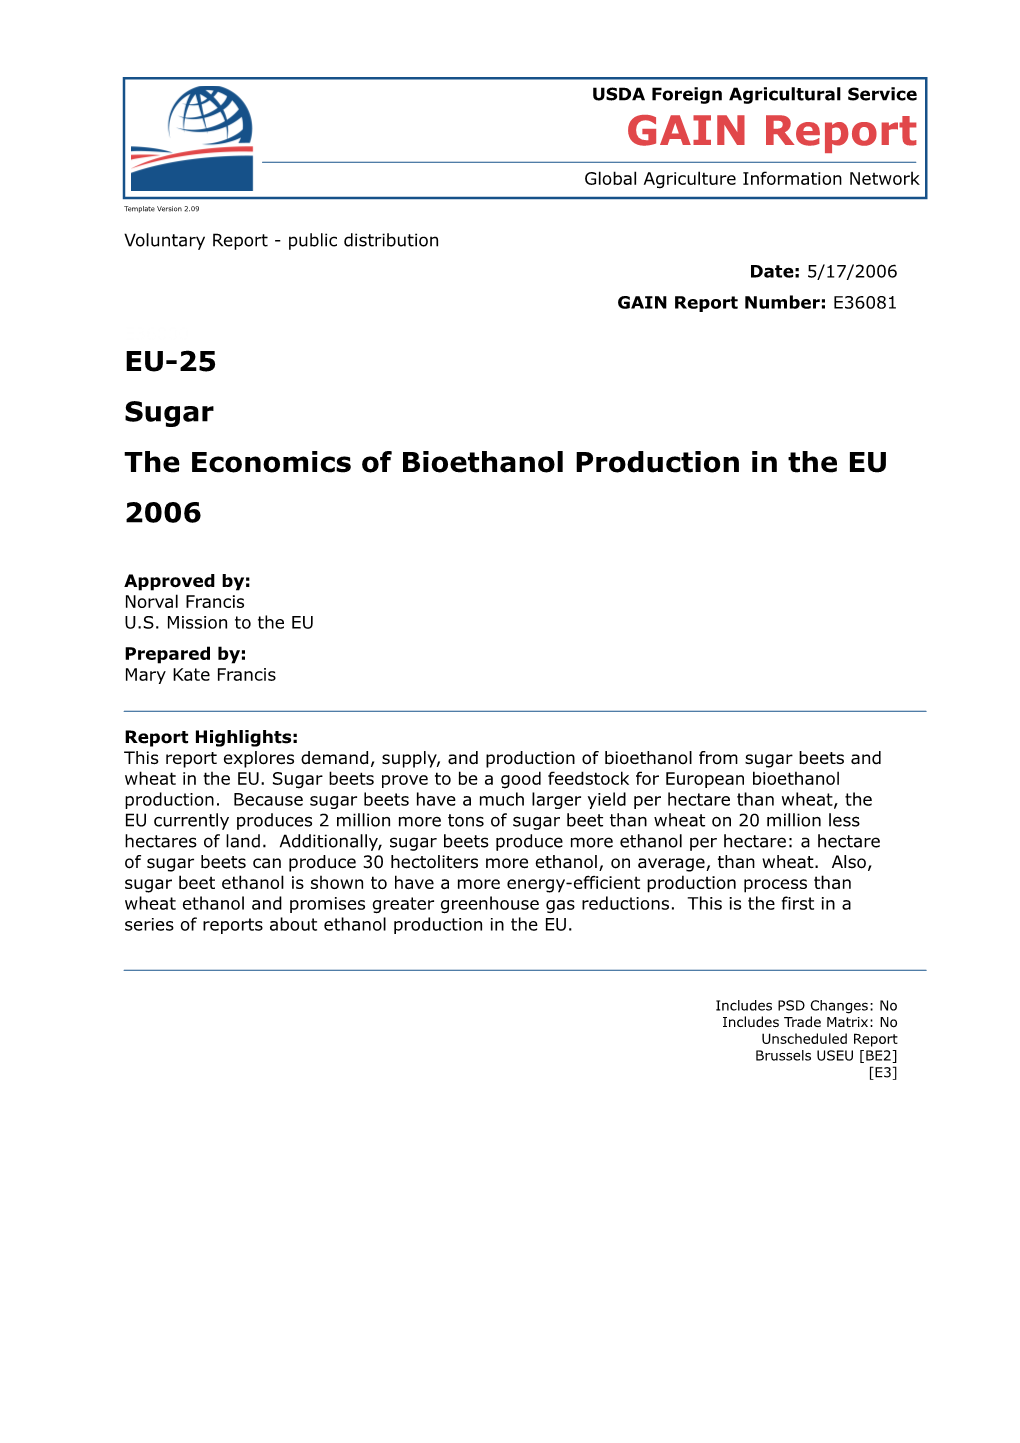 The Economics of Bioethanol Production in the EU